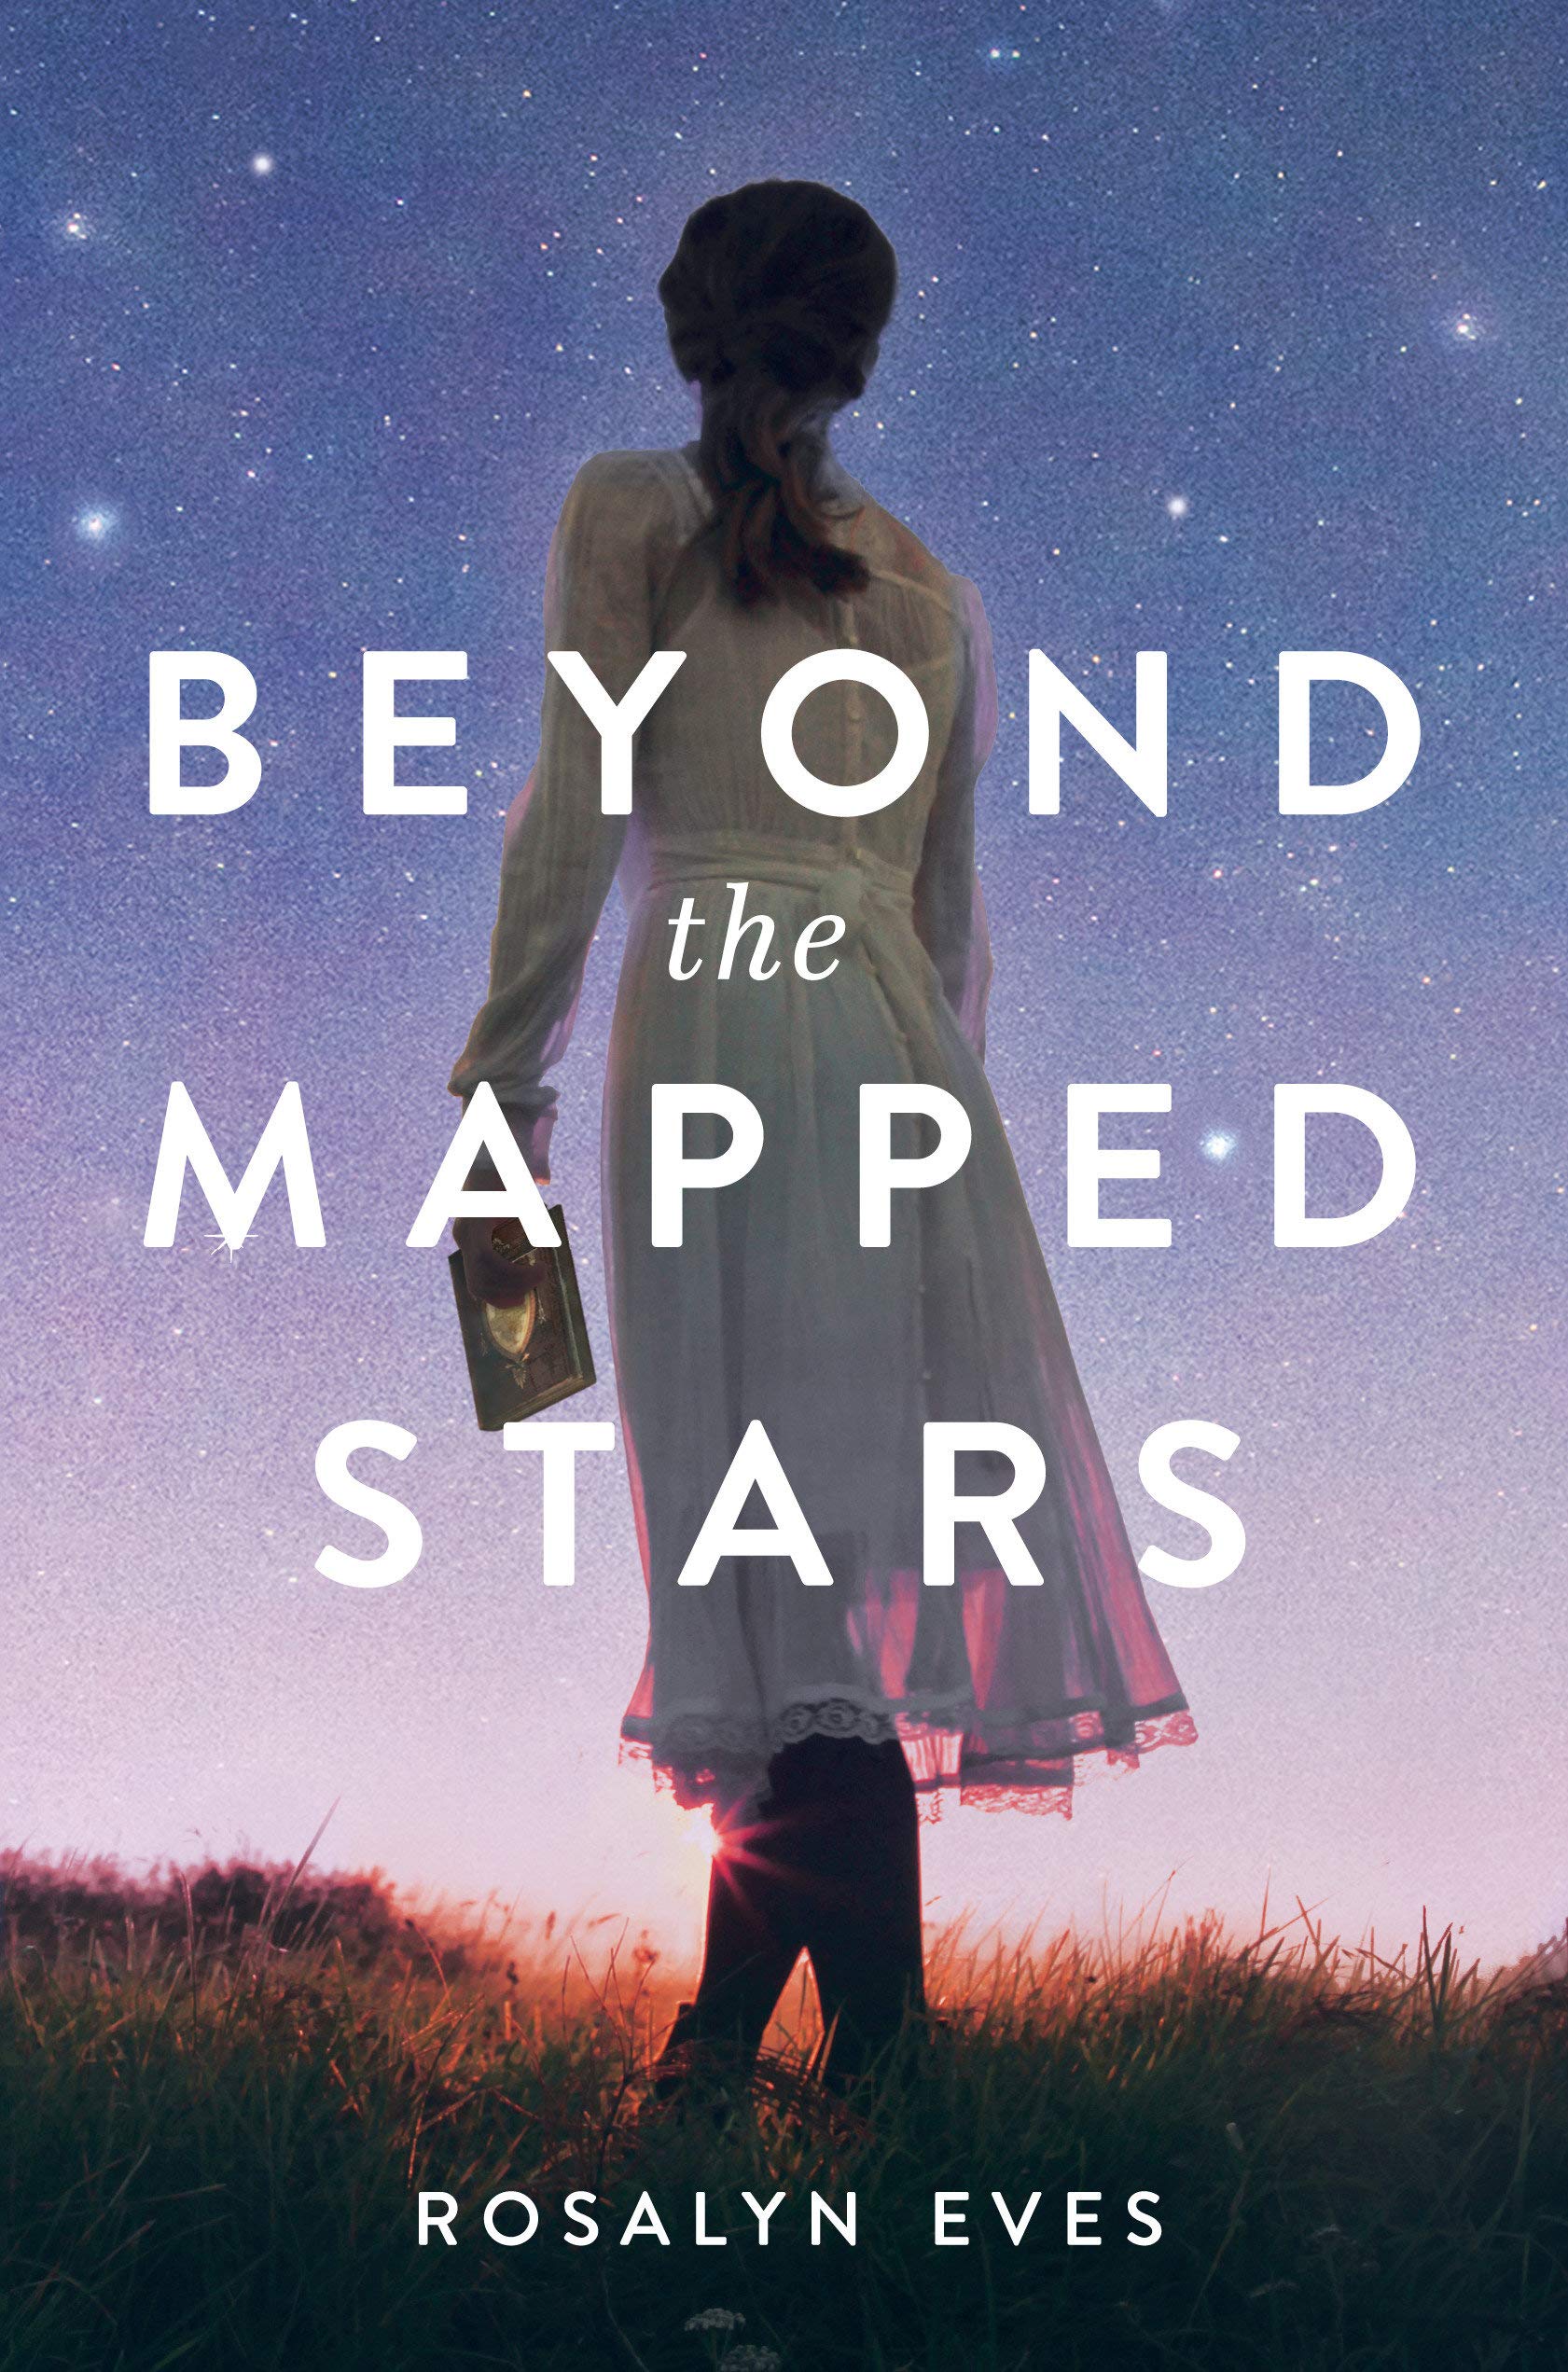 Beyond the Mapped Stars